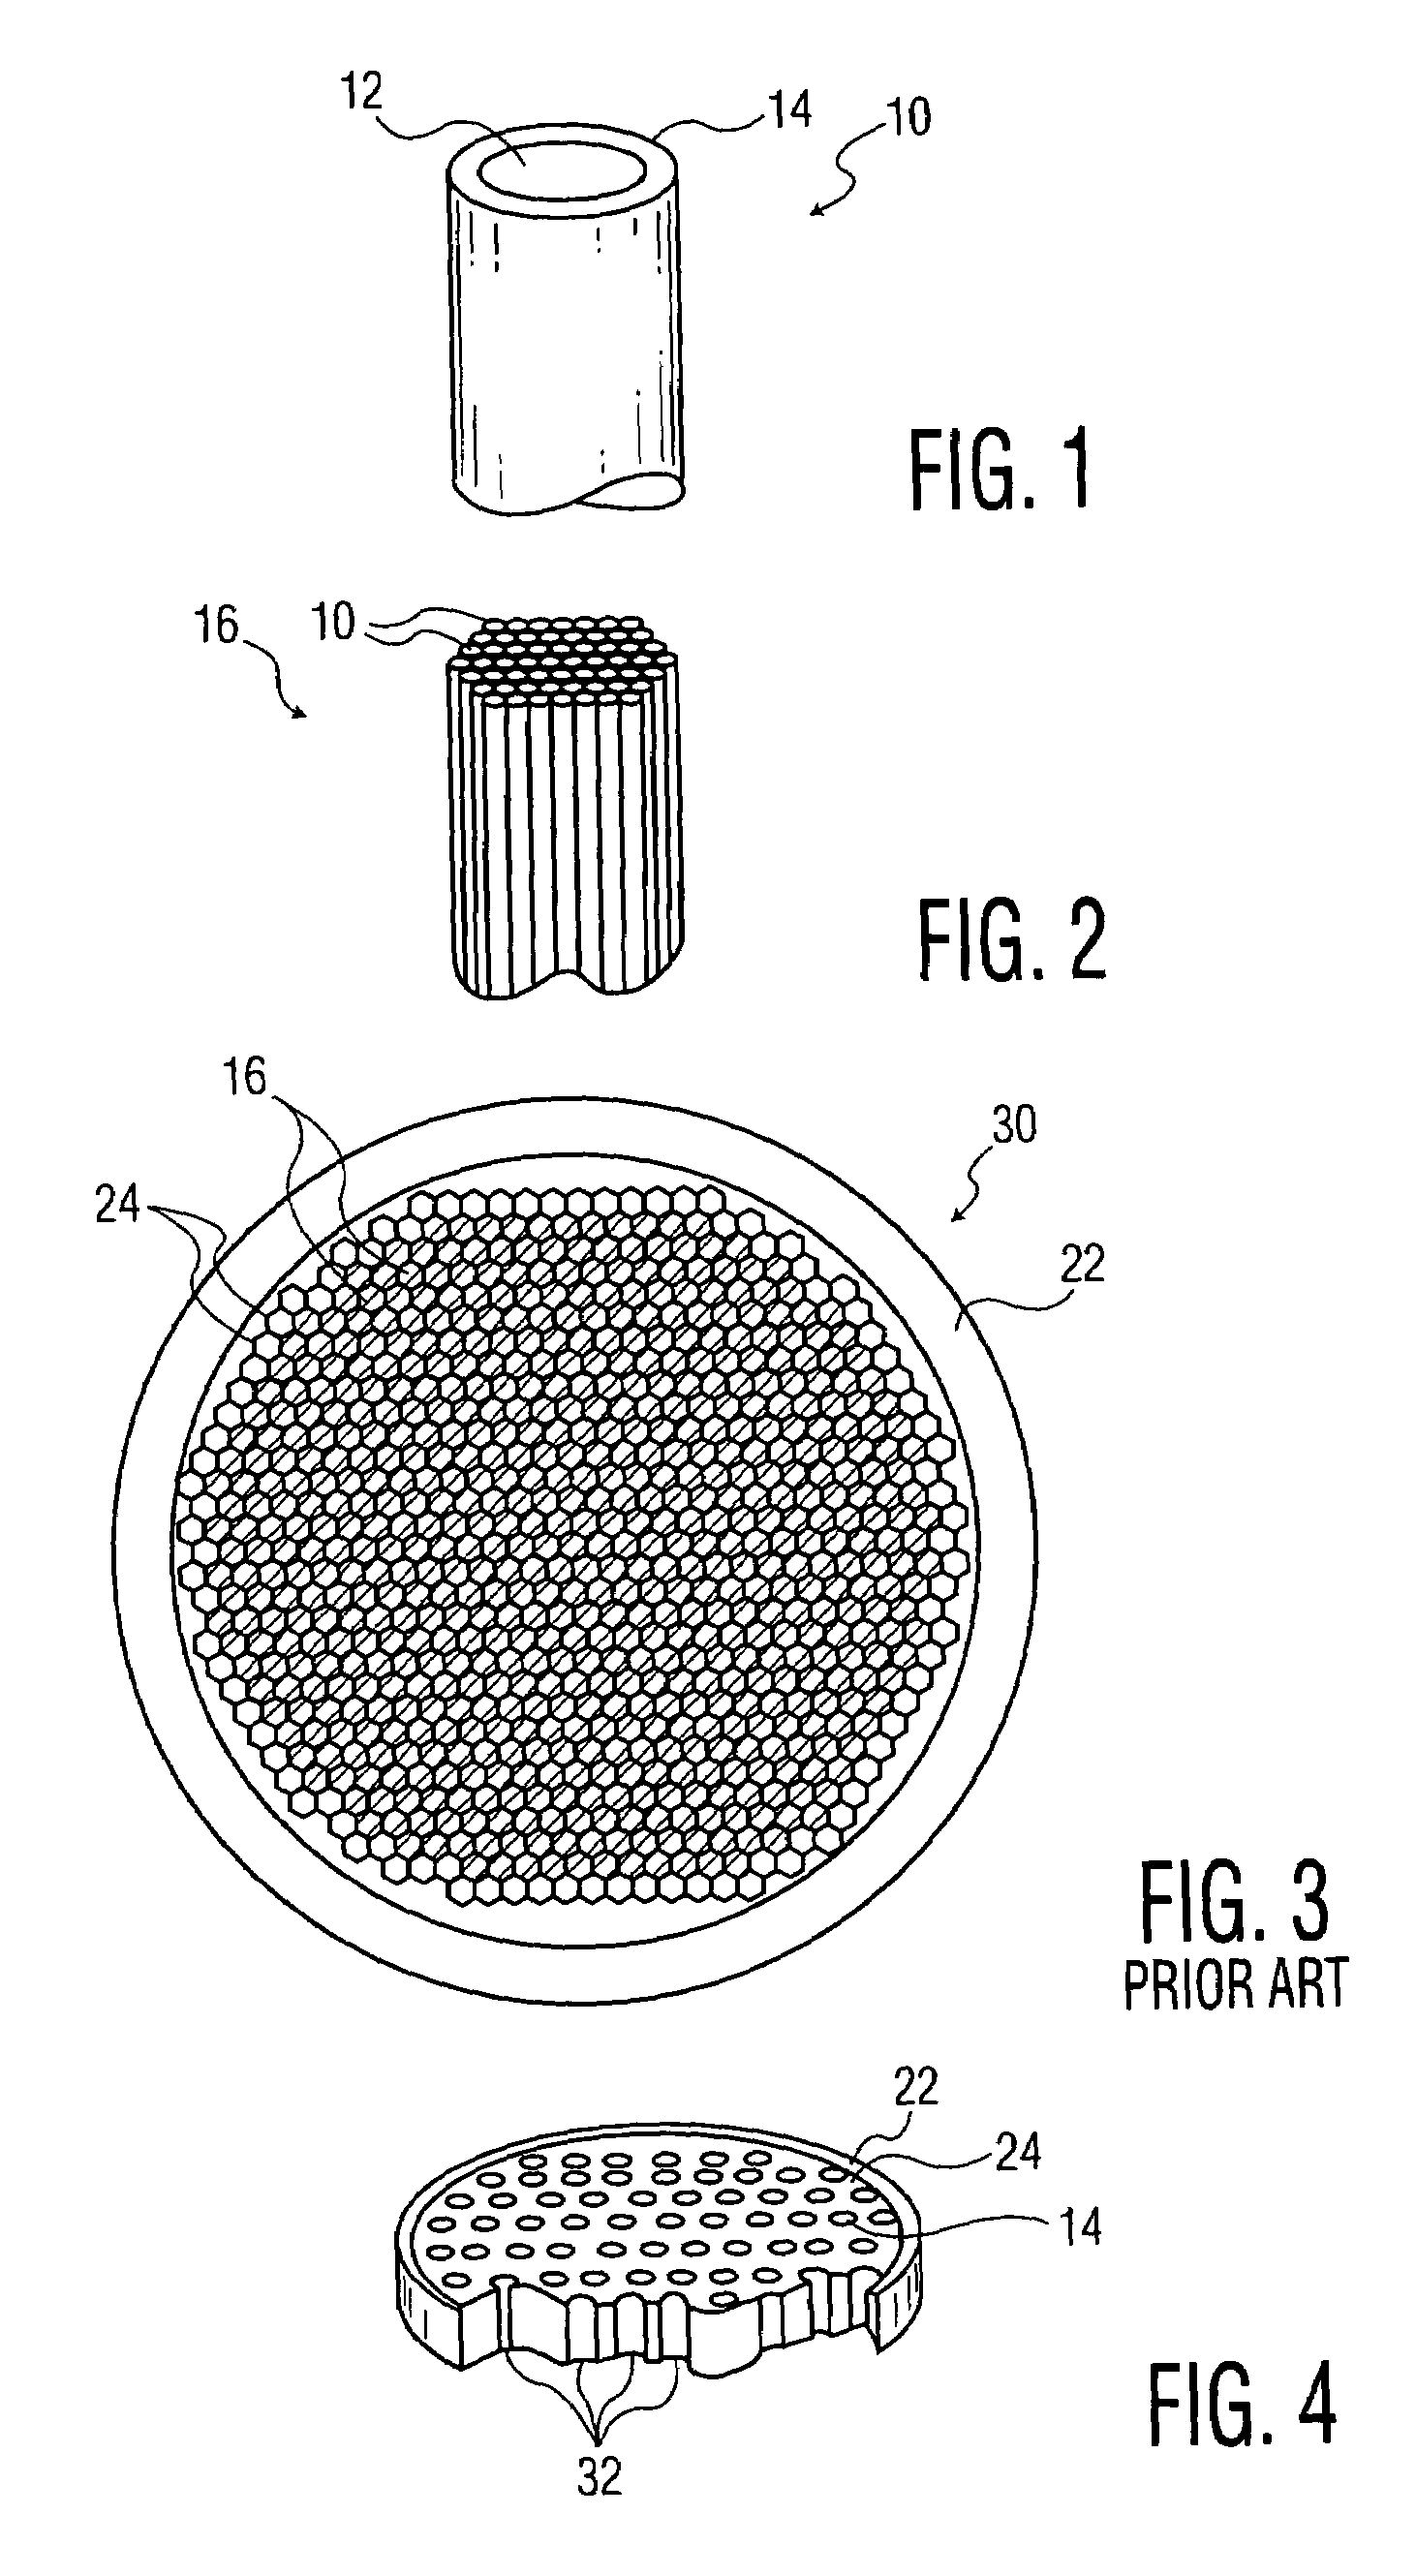 Perforated mega-boule wafer for fabrication of microchannel plates (MCPs)